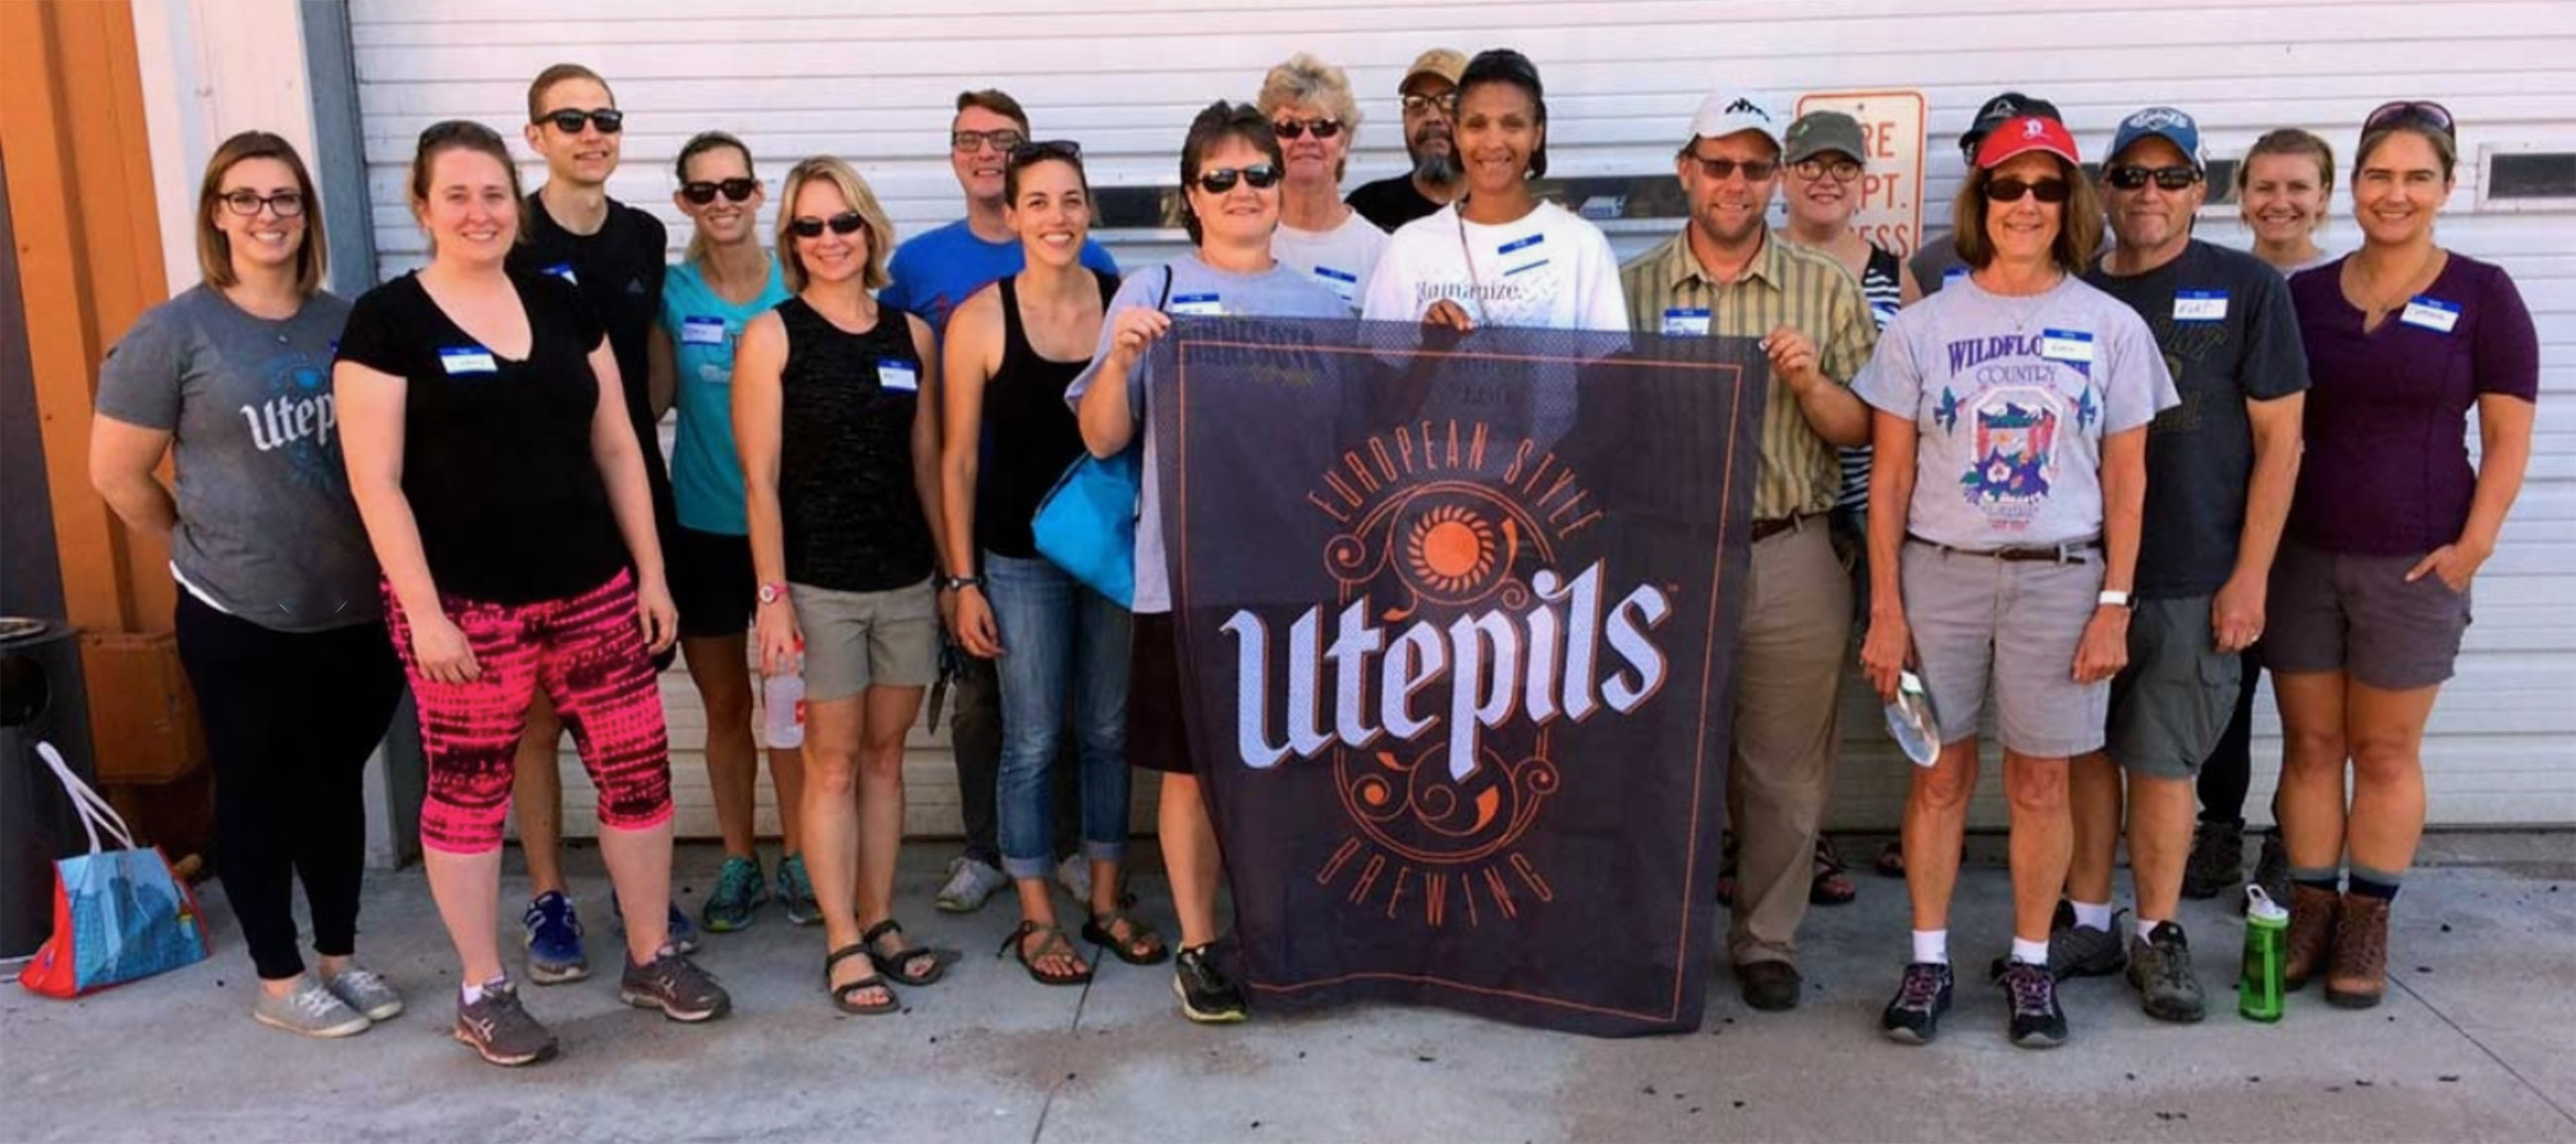 The DuGood Team picture behind a Utepils banner